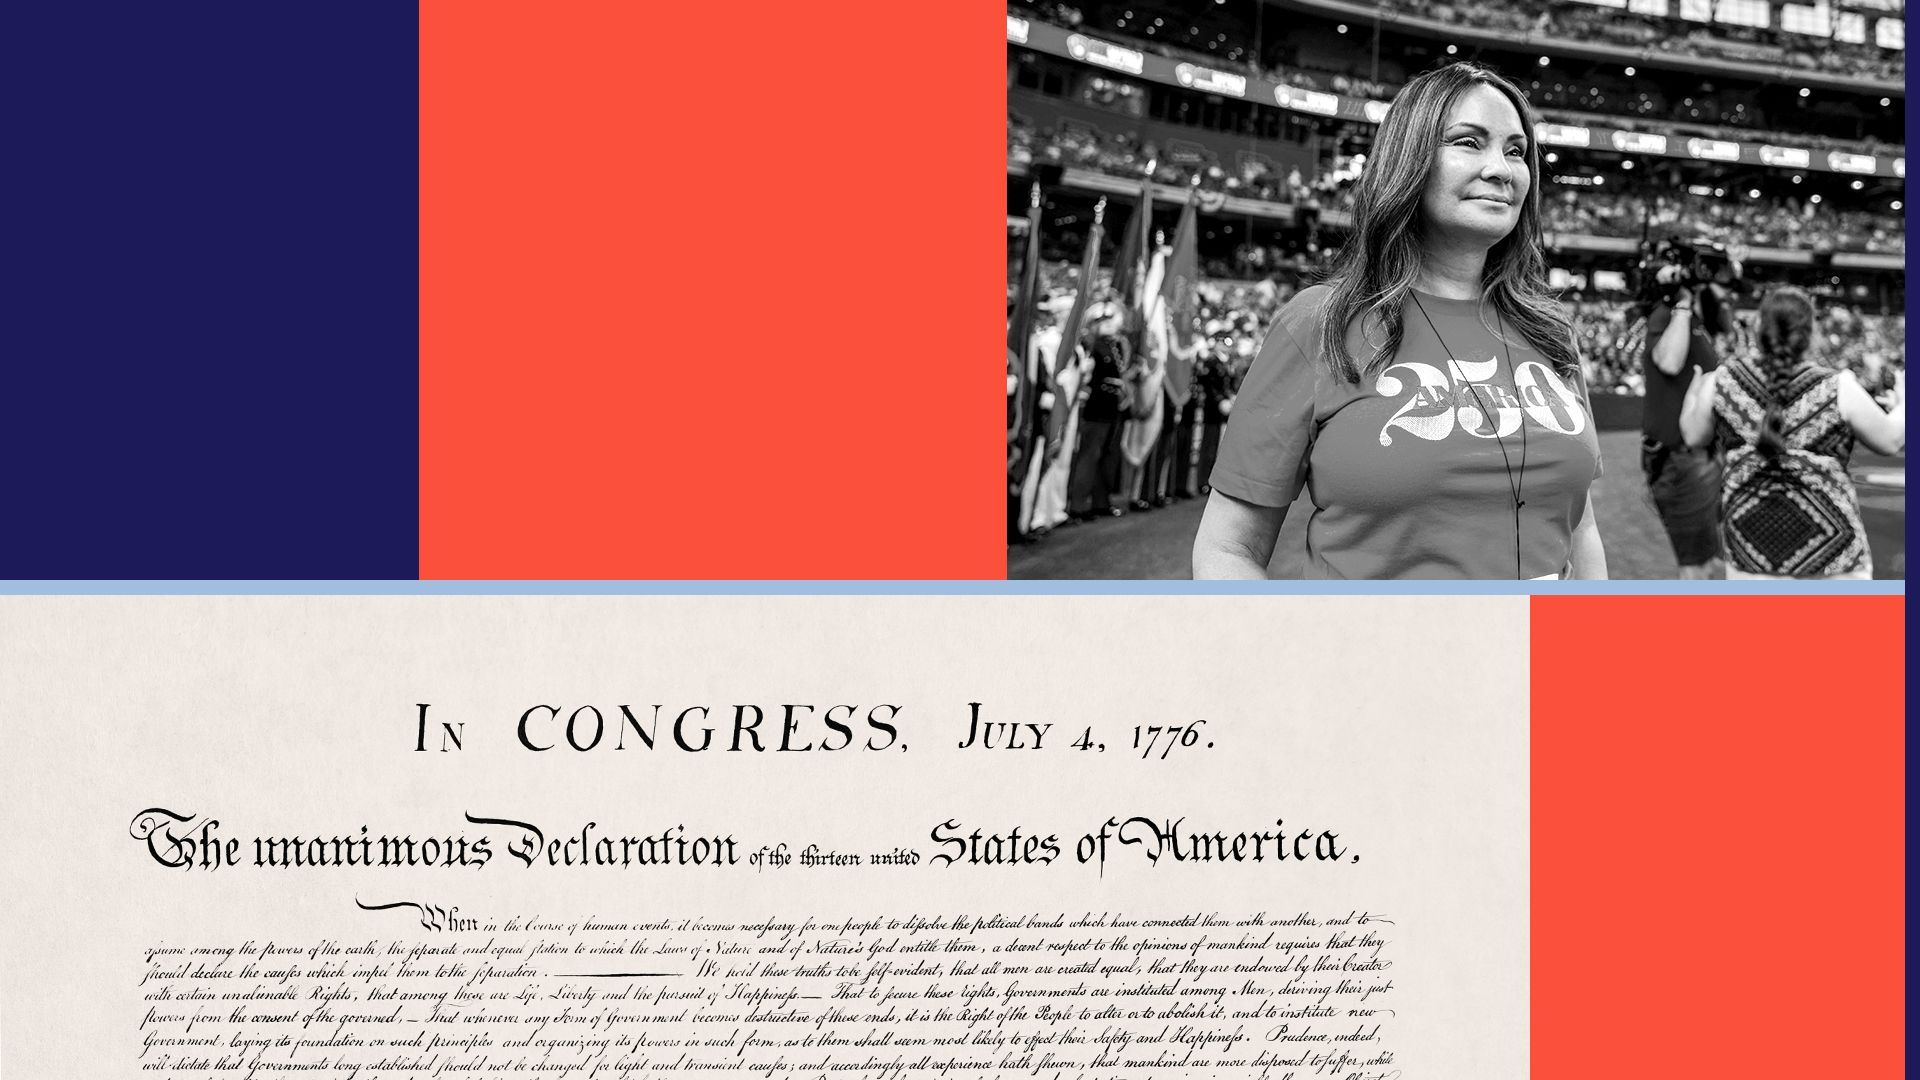 Photo illustration of Rosie Rios next to graphic shapes and an image of the Declaration of Independence.